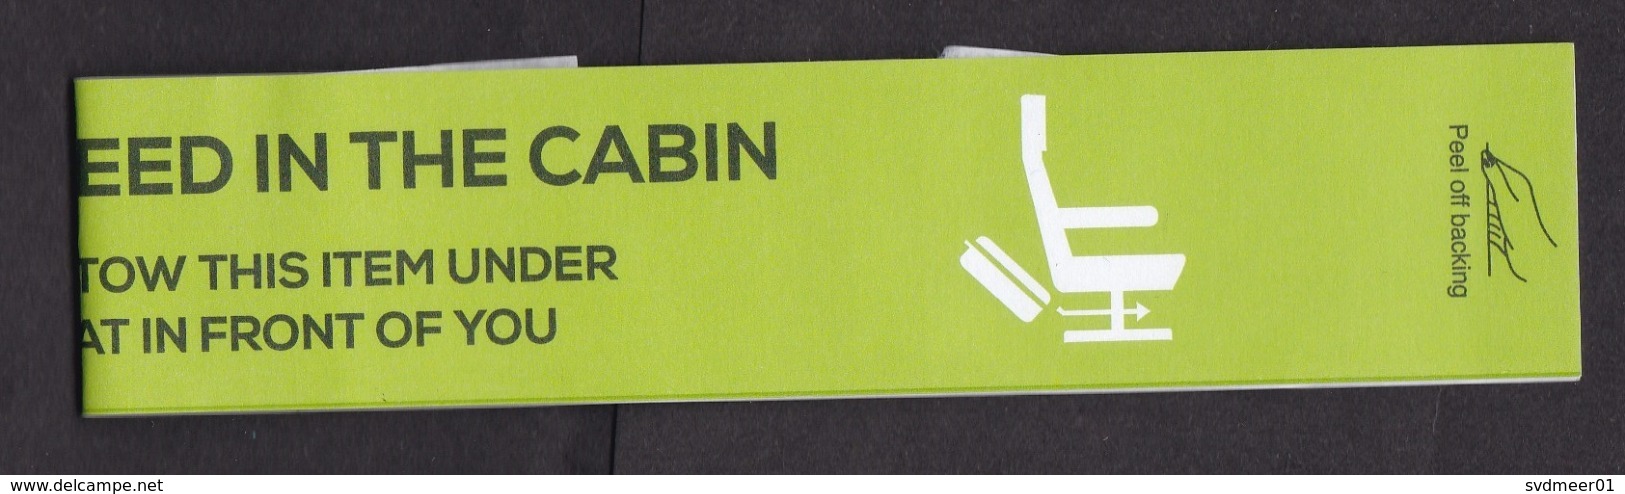 Transavia Airlines, Netherlands: Luggage Label, Baggage Tag, Cabin Baggage, Aviation (traces Of Use) - Etiquetas De Equipaje